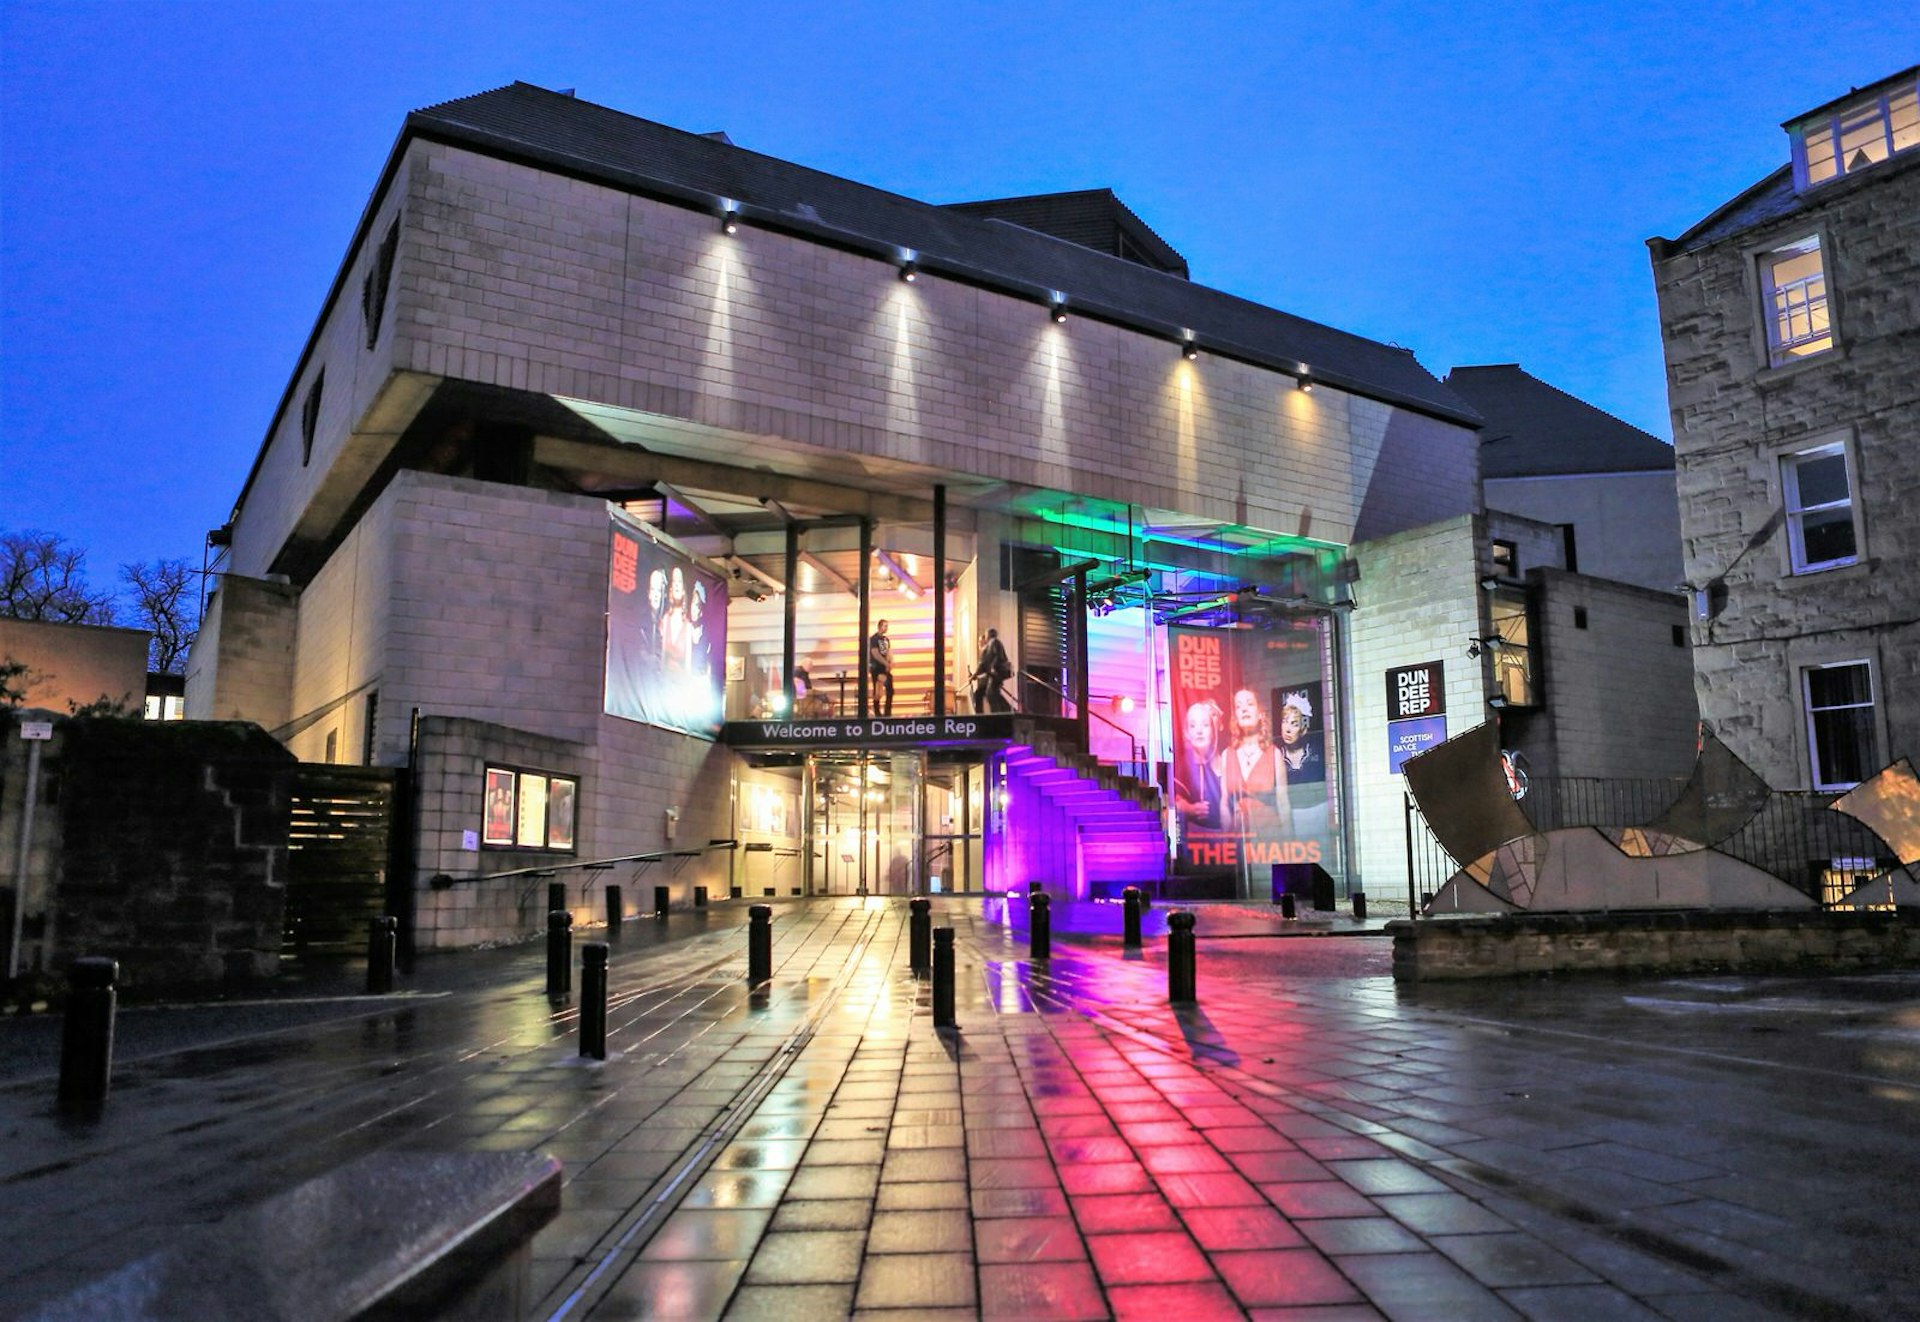 Scotland's only repetory theatre has been a cultural fixture since the 1970s © Dundee Rep